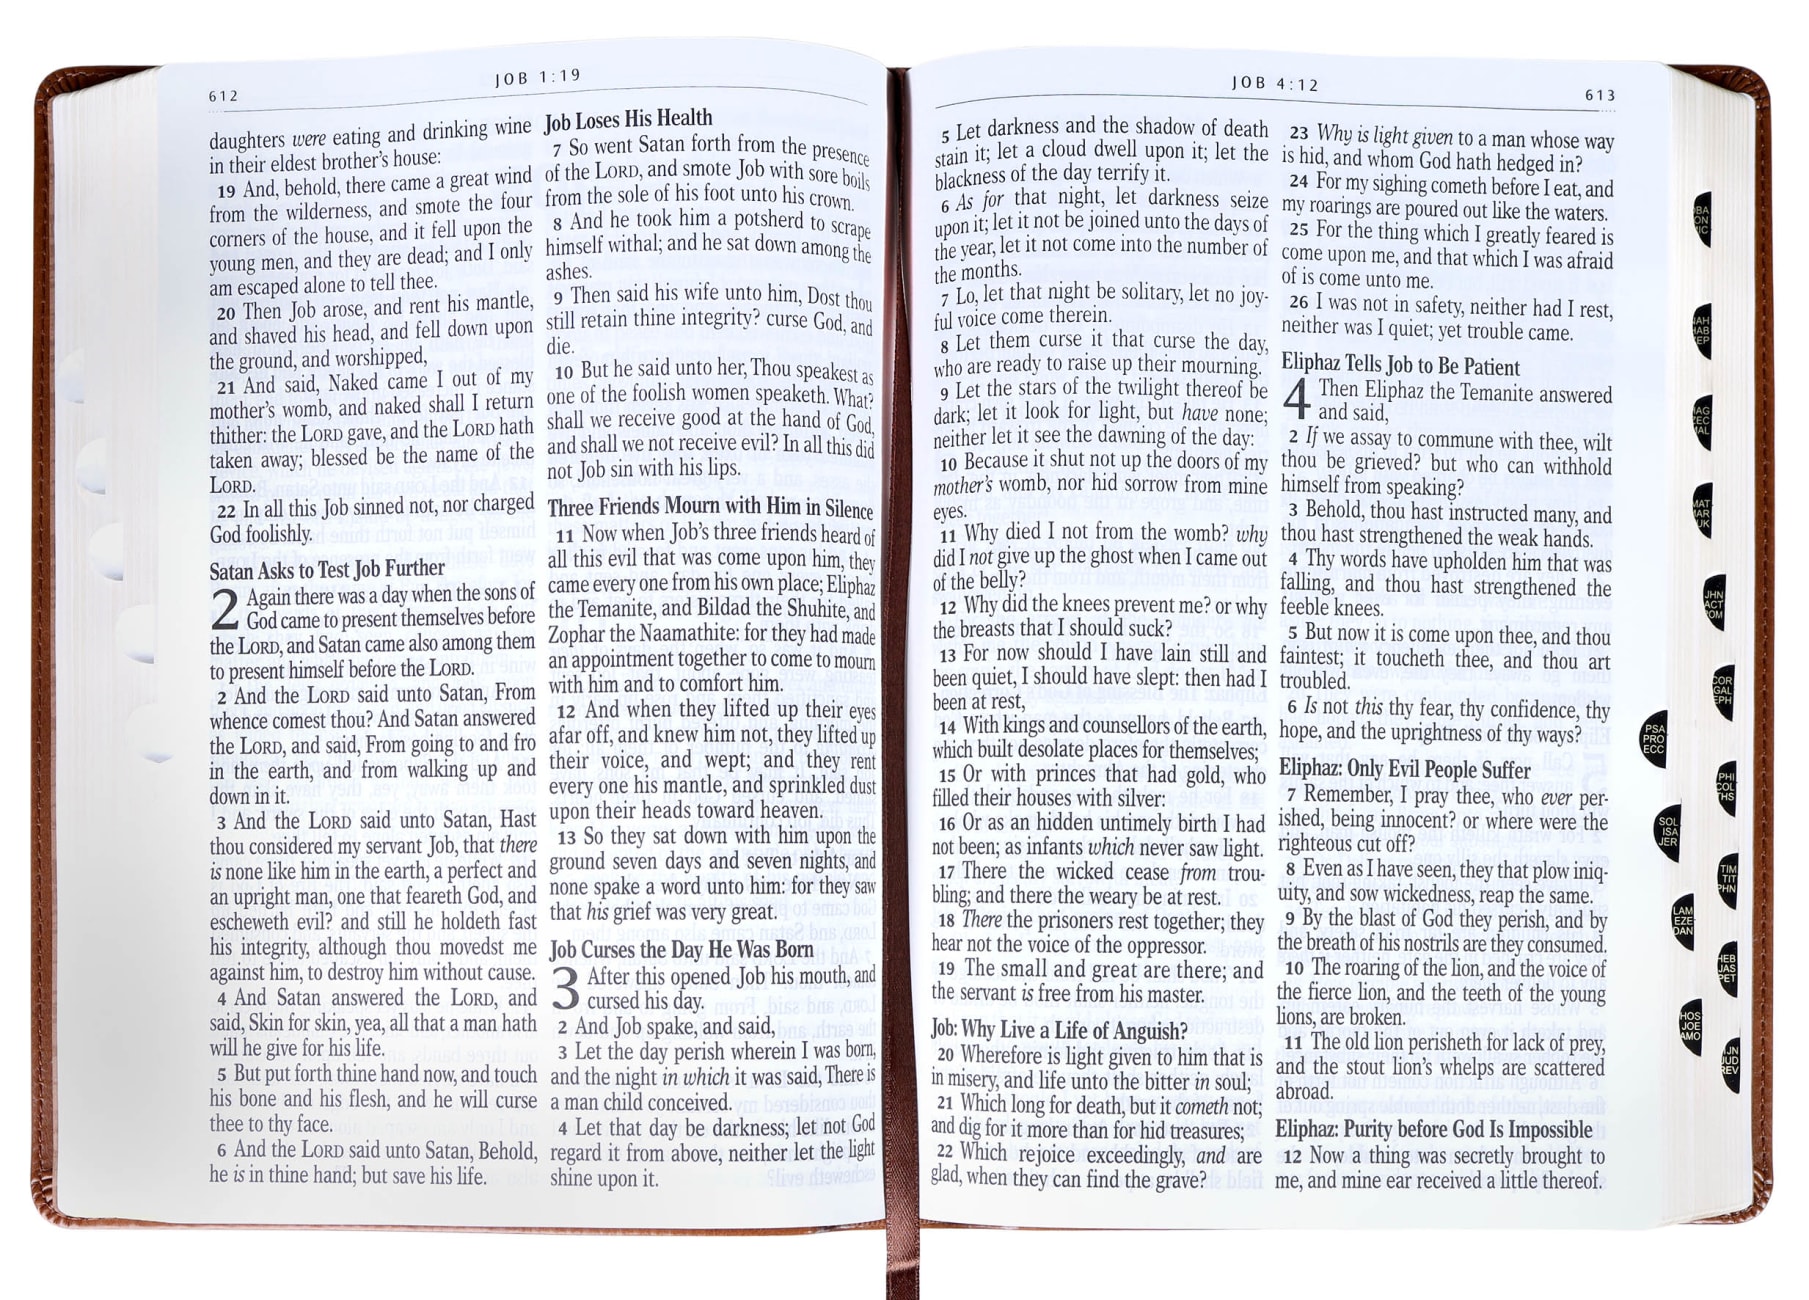 KJV Giant Print Bible Indexed Tan Flowers (Red Letter Edition) Imitation Leather